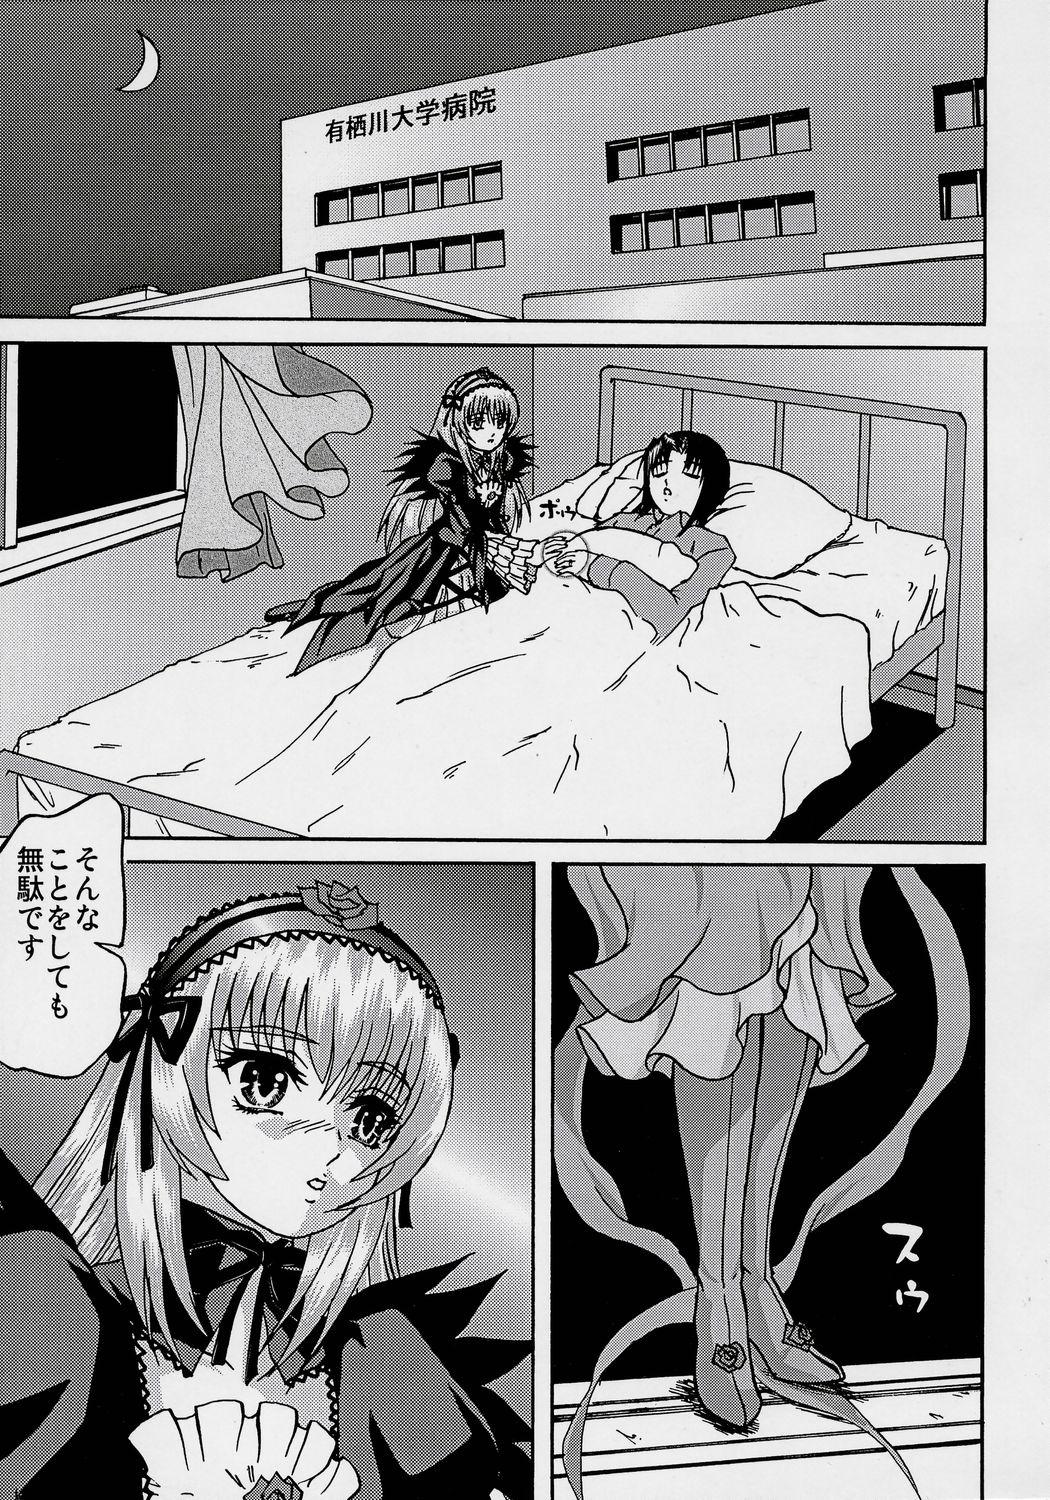 Dirty ANATOMIA ALICE II Antiheldin - Rozen maiden Oldvsyoung - Page 4